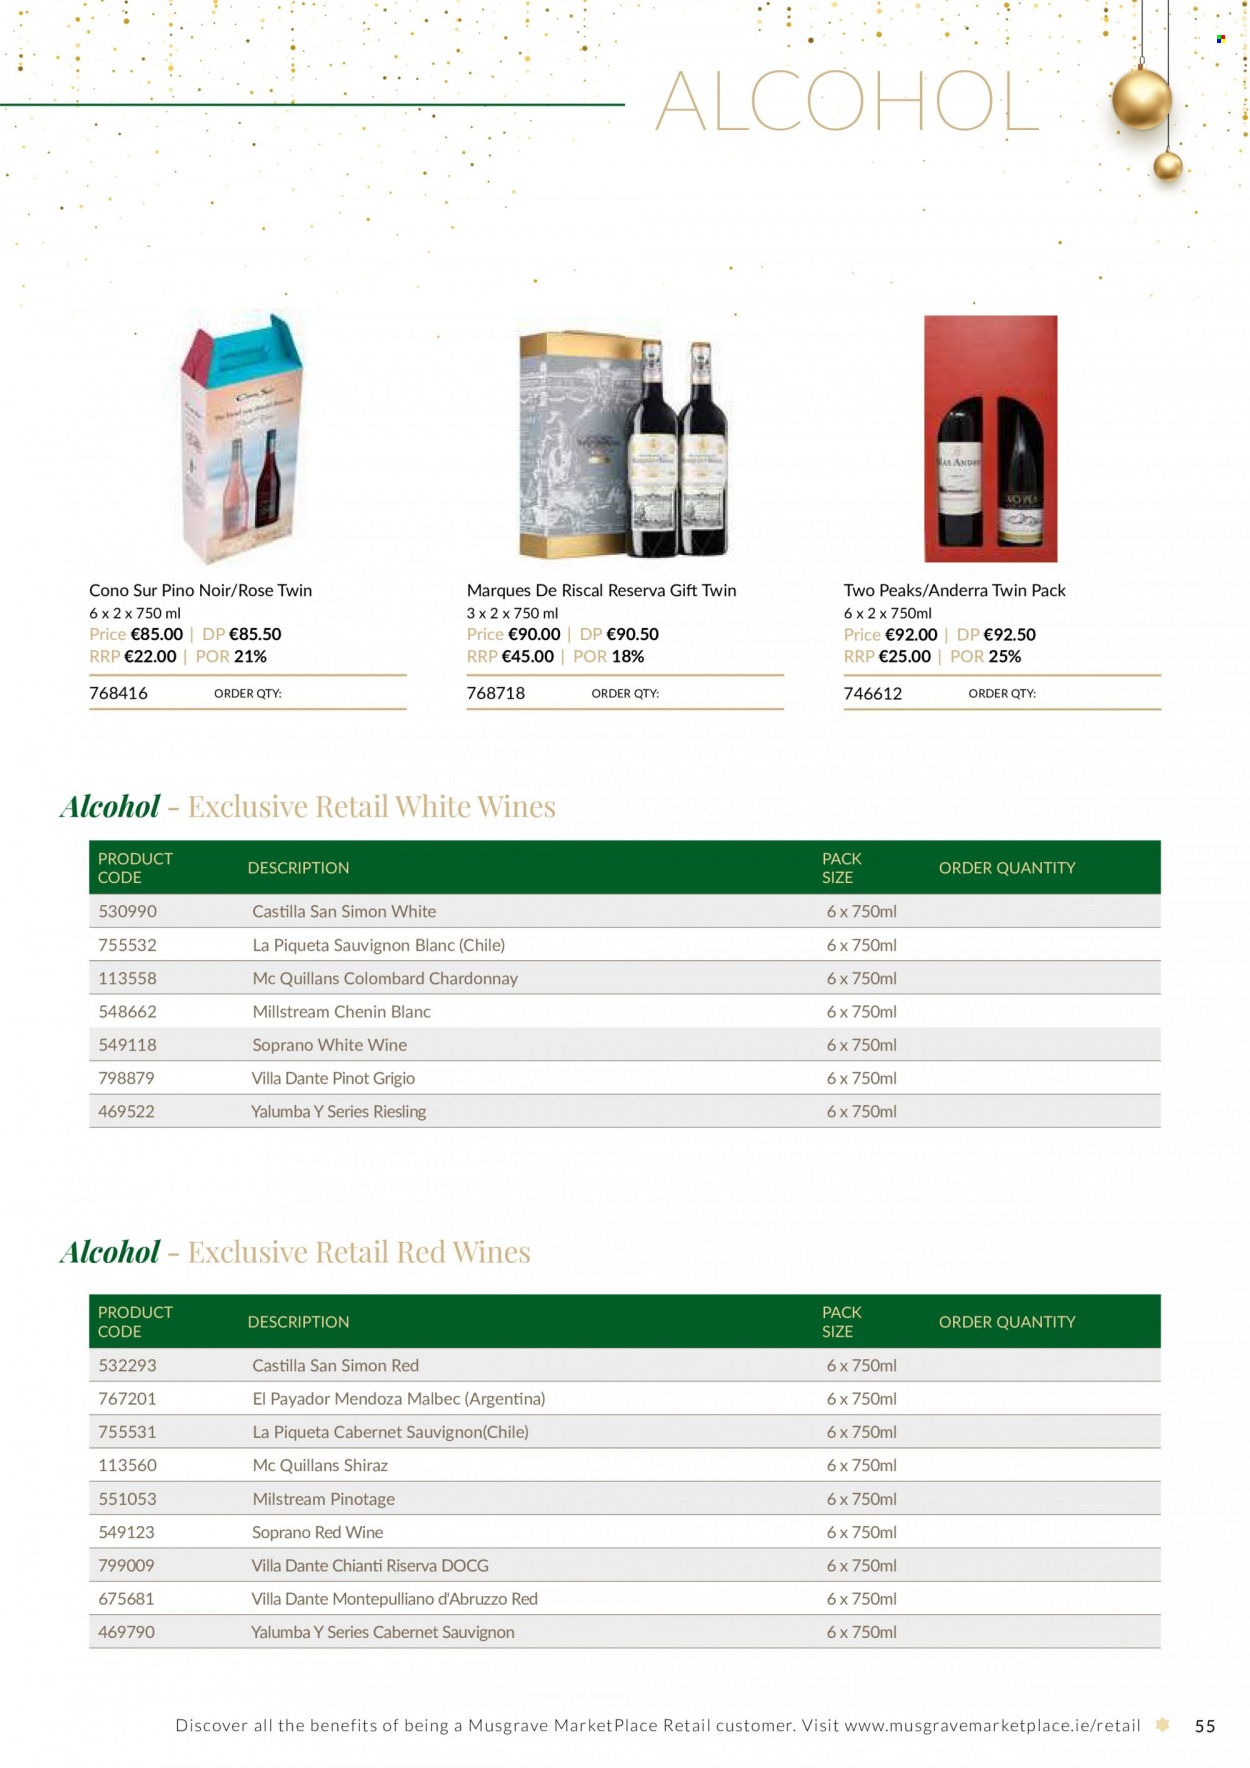 thumbnail - MUSGRAVE Market Place offer  - Sales products - Cabernet Sauvignon, red wine, Riesling, white wine, Chardonnay, wine, alcohol, Chenin Blanc, Shiraz, Pinot Grigio, Sauvignon Blanc, rosé wine. Page 55.